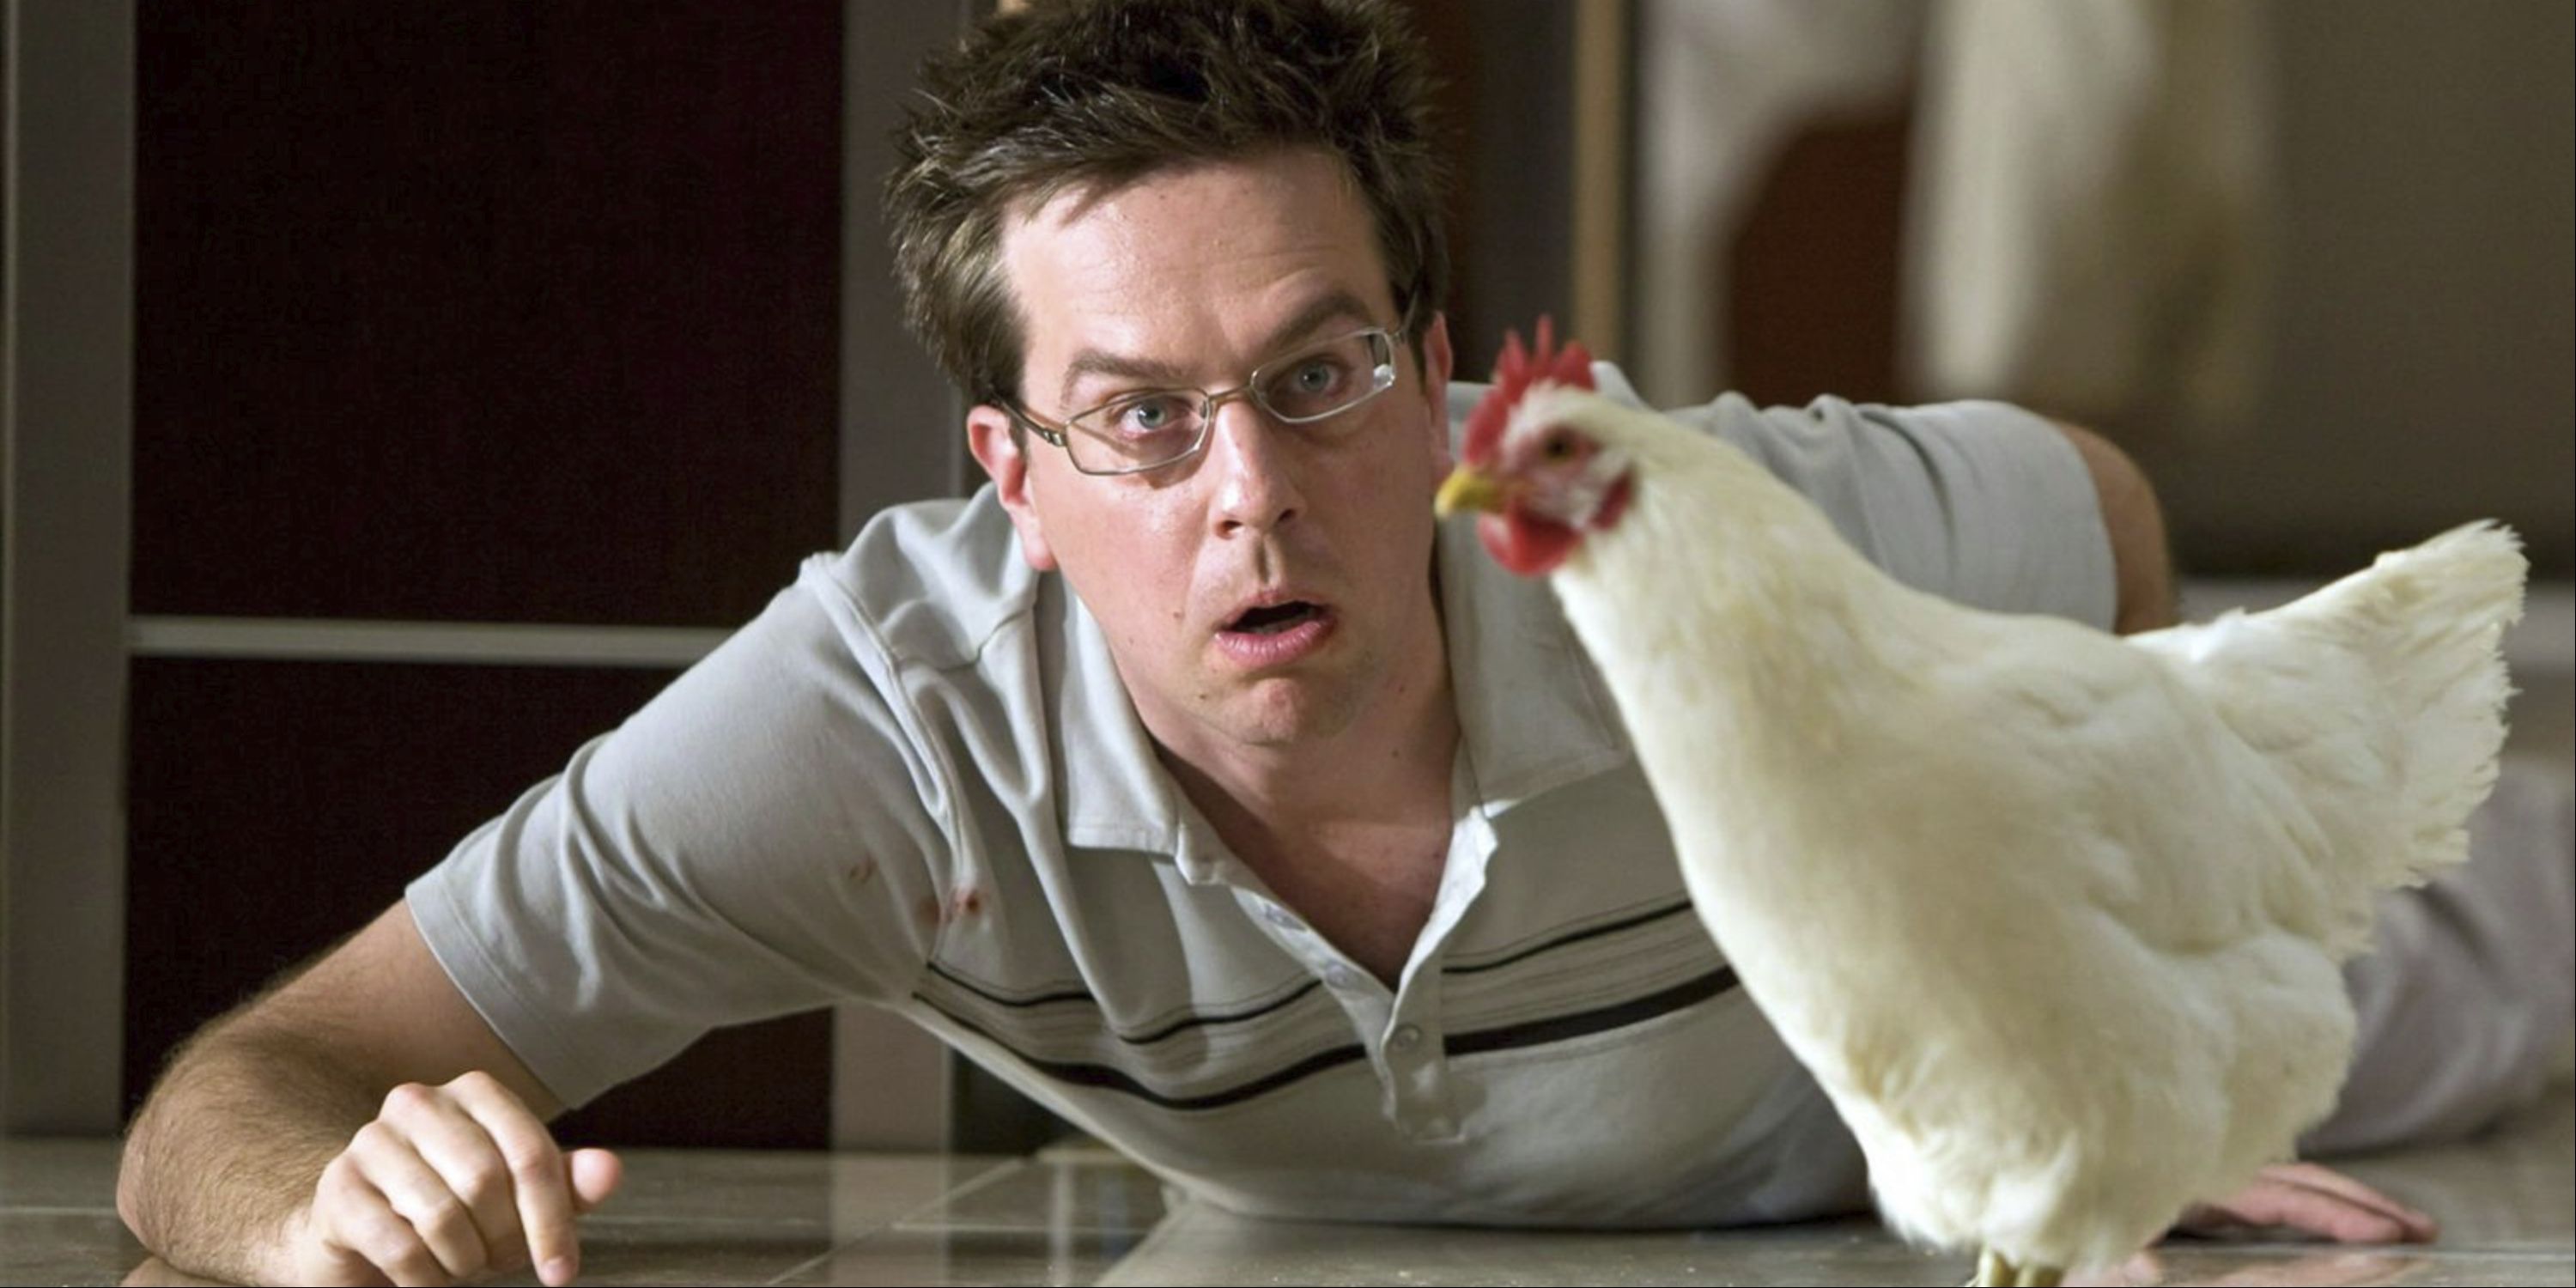 Ed Helms as Stu staring at a chicken in The Hangover